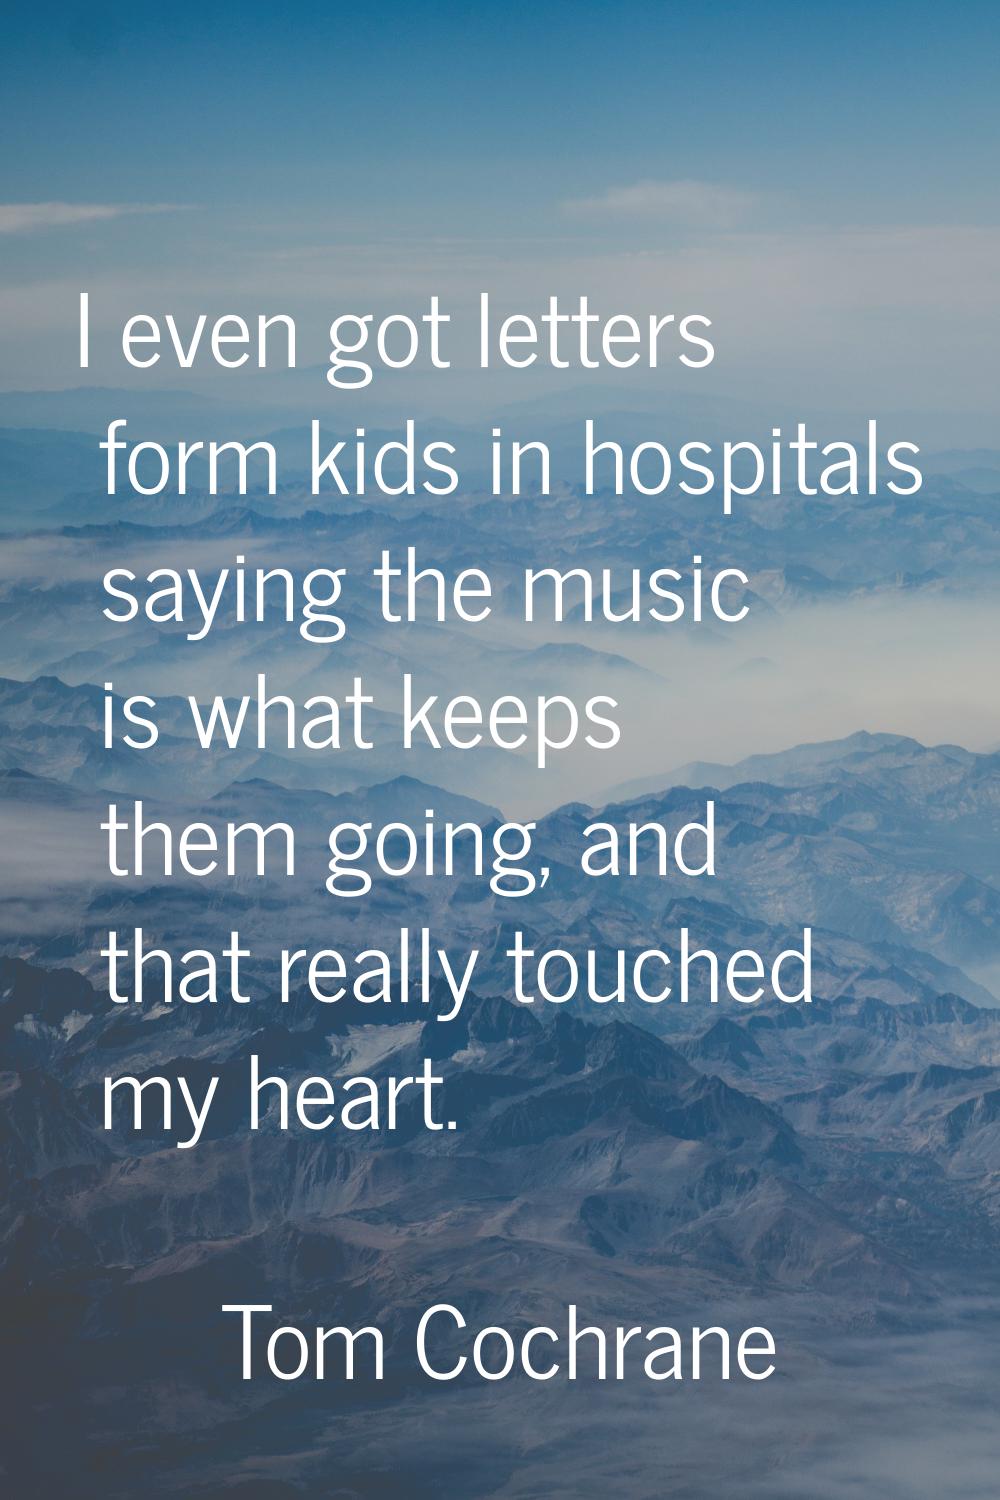 I even got letters form kids in hospitals saying the music is what keeps them going, and that reall